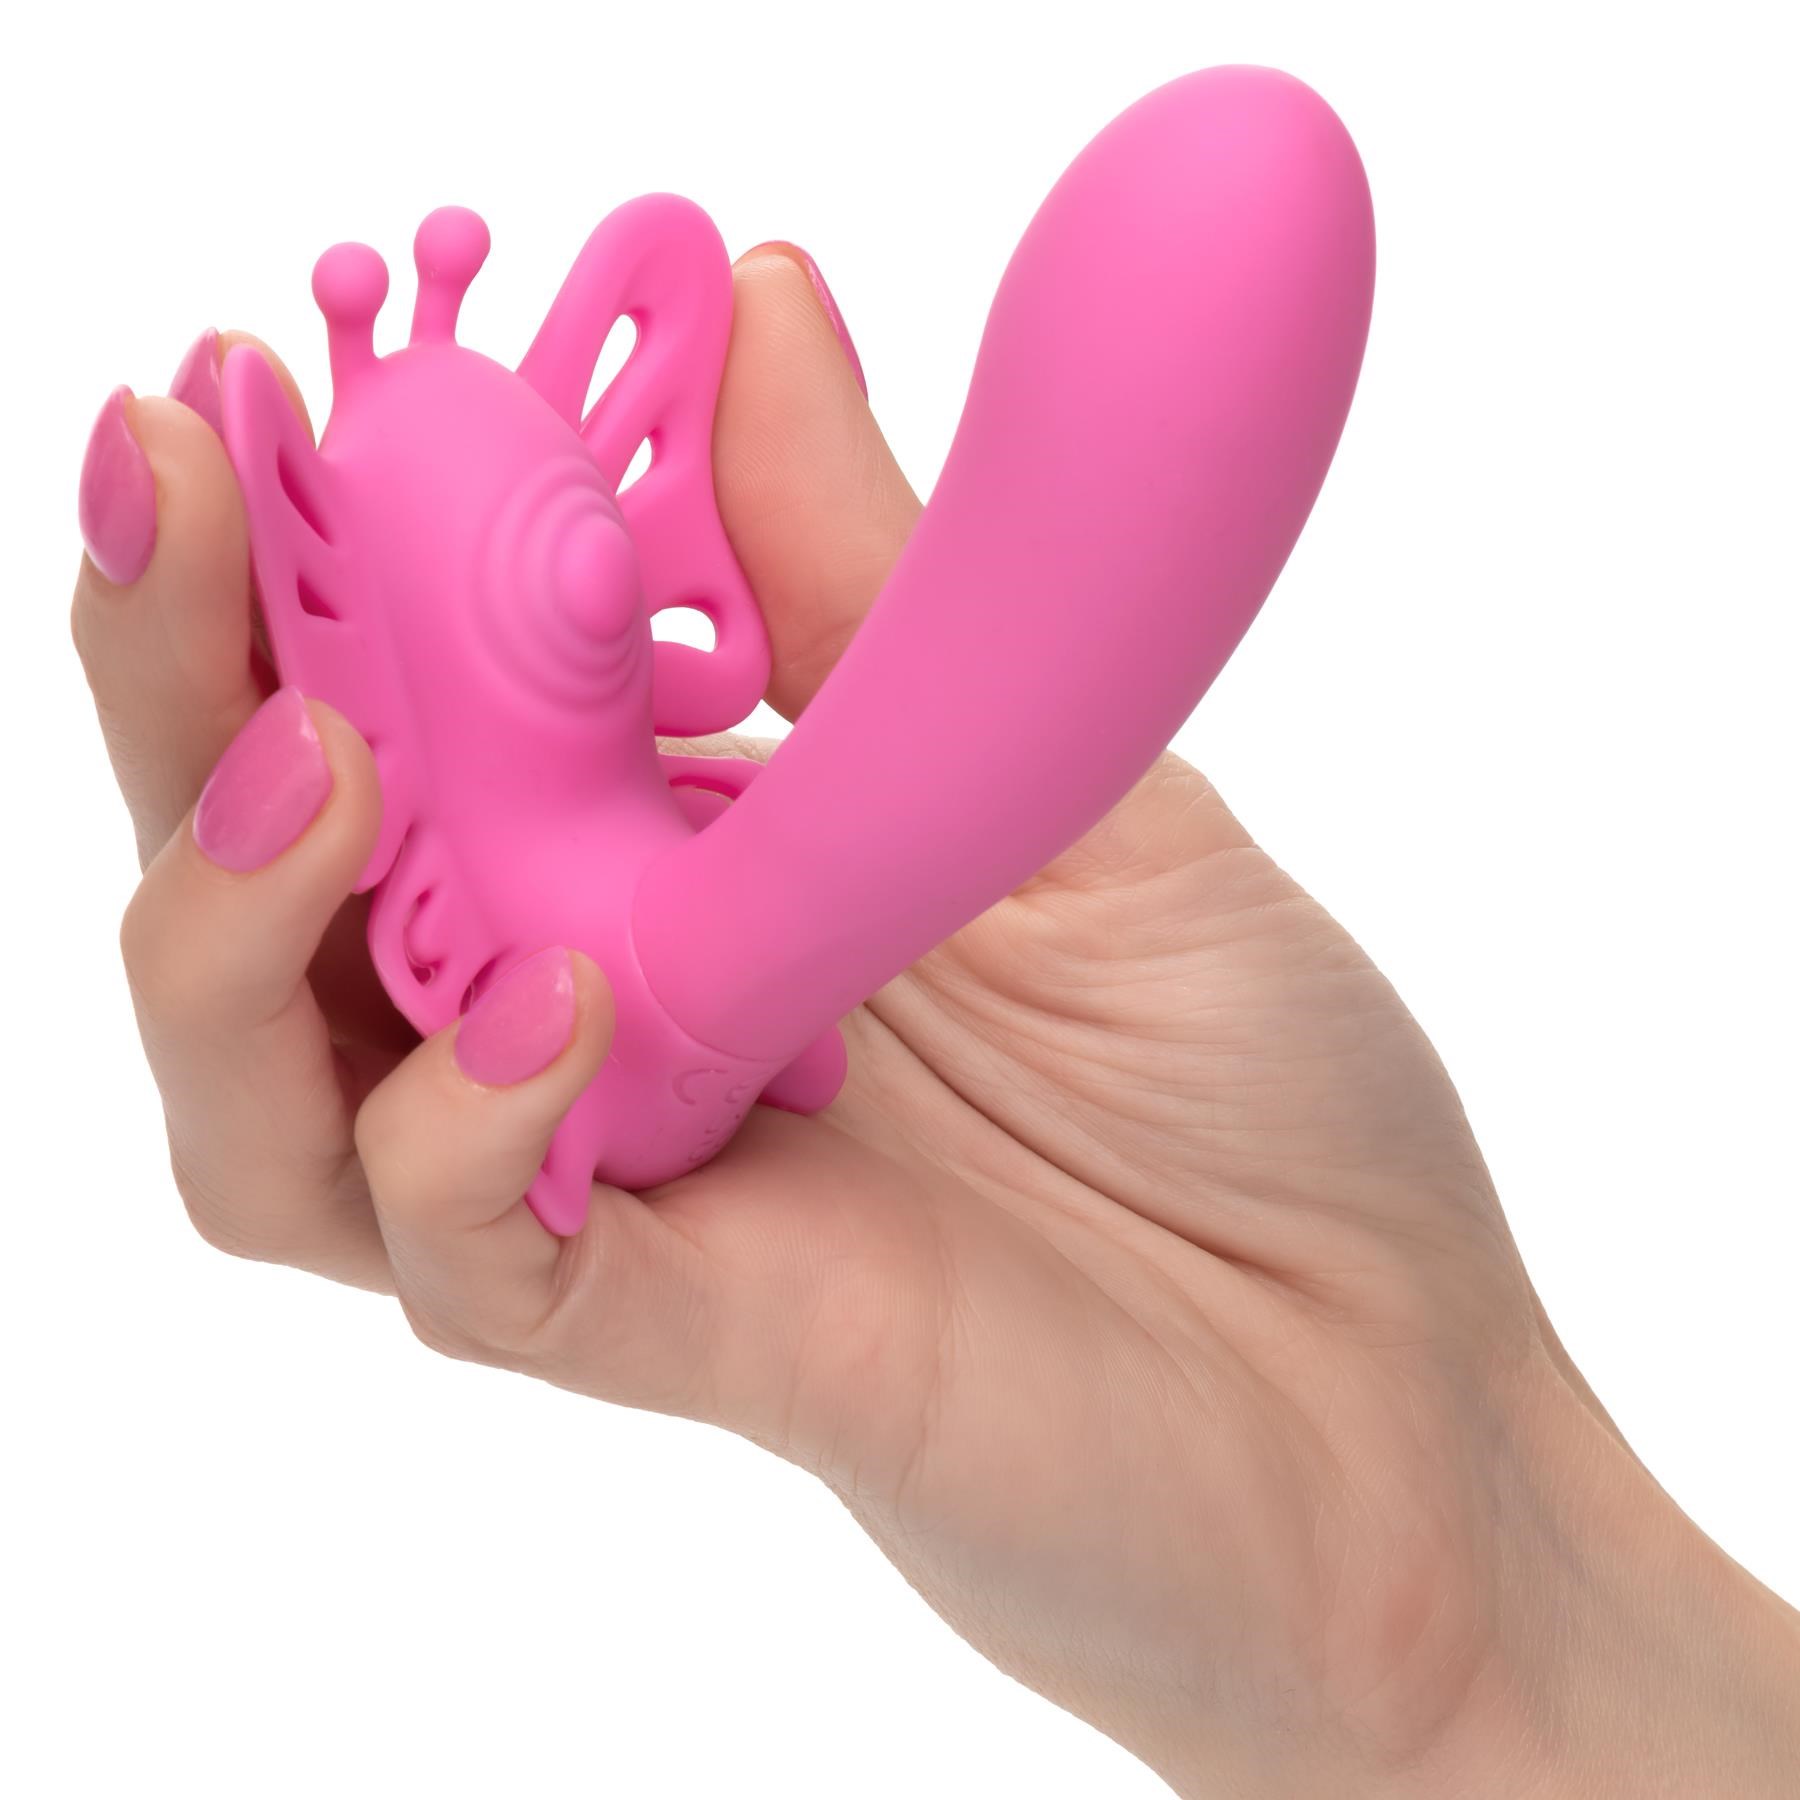 Venus Butterfly Pulsating Venus G - Hand Shot to Show Size - Product